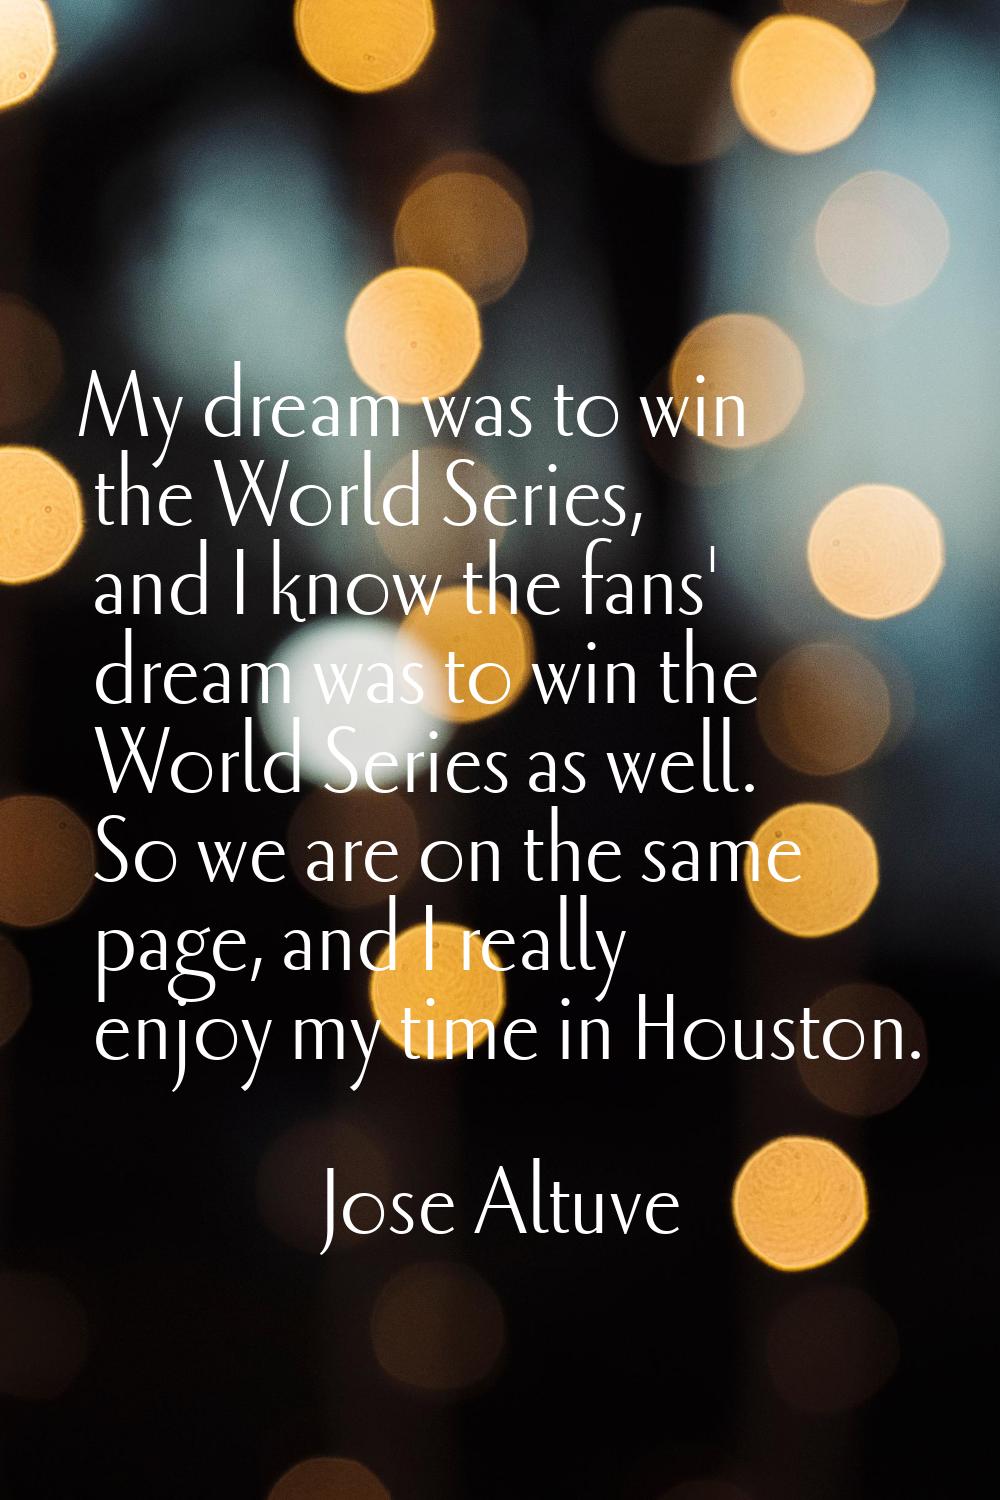 My dream was to win the World Series, and I know the fans' dream was to win the World Series as wel